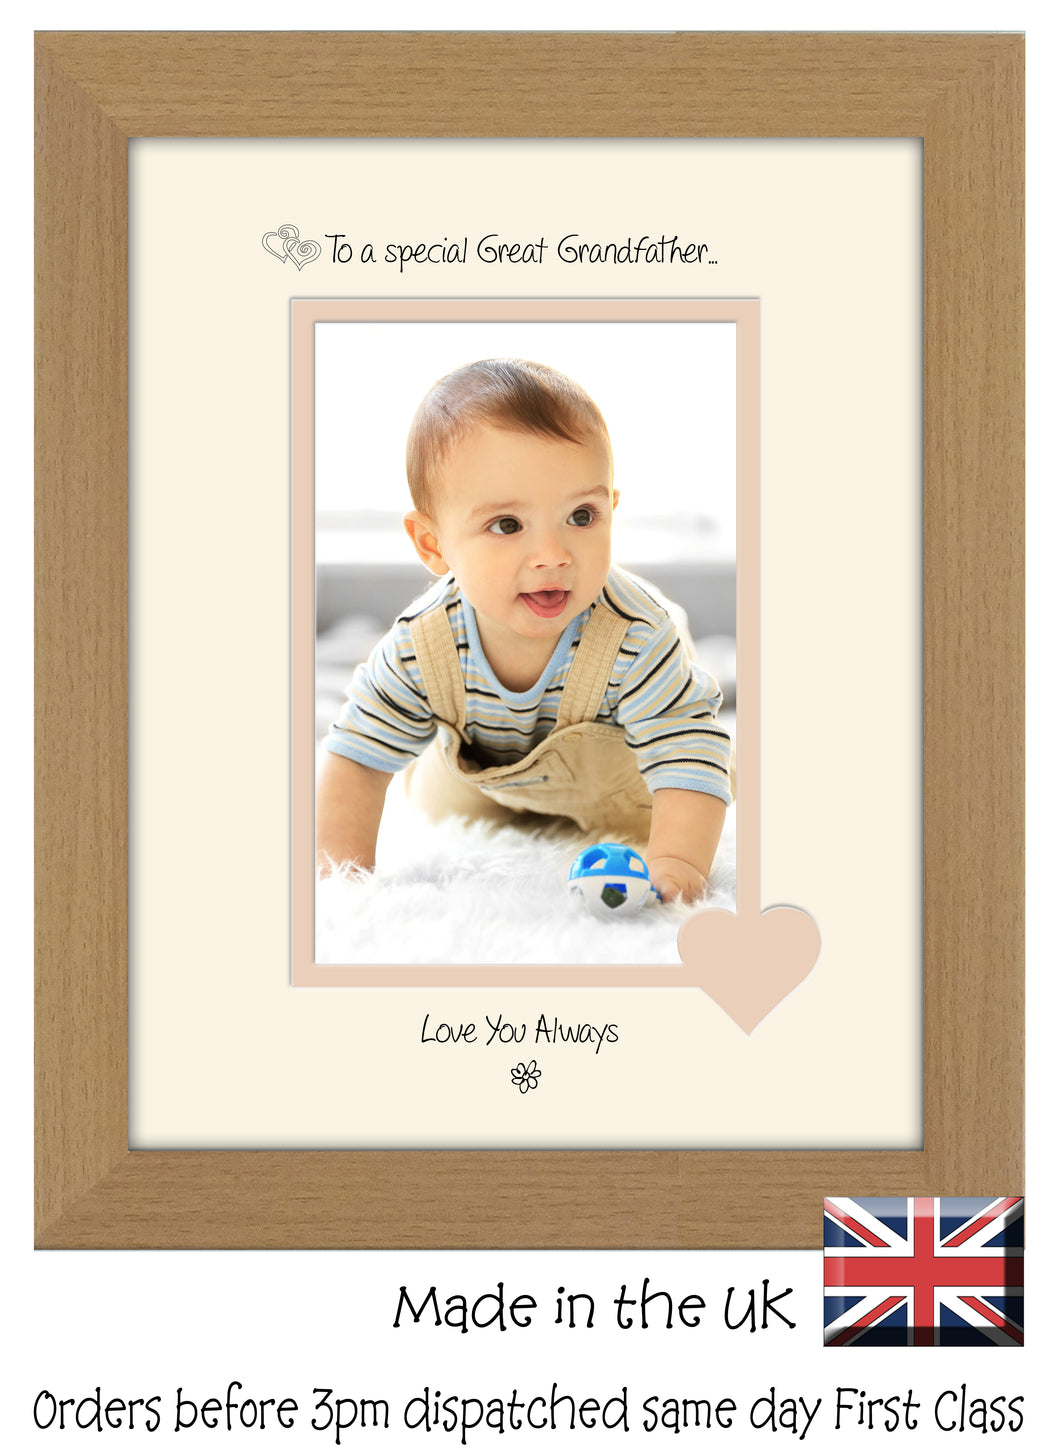 Great Grandfather Photo Frame - To a Special Great Grandfather ... Love you Always Portrait photo frame 6